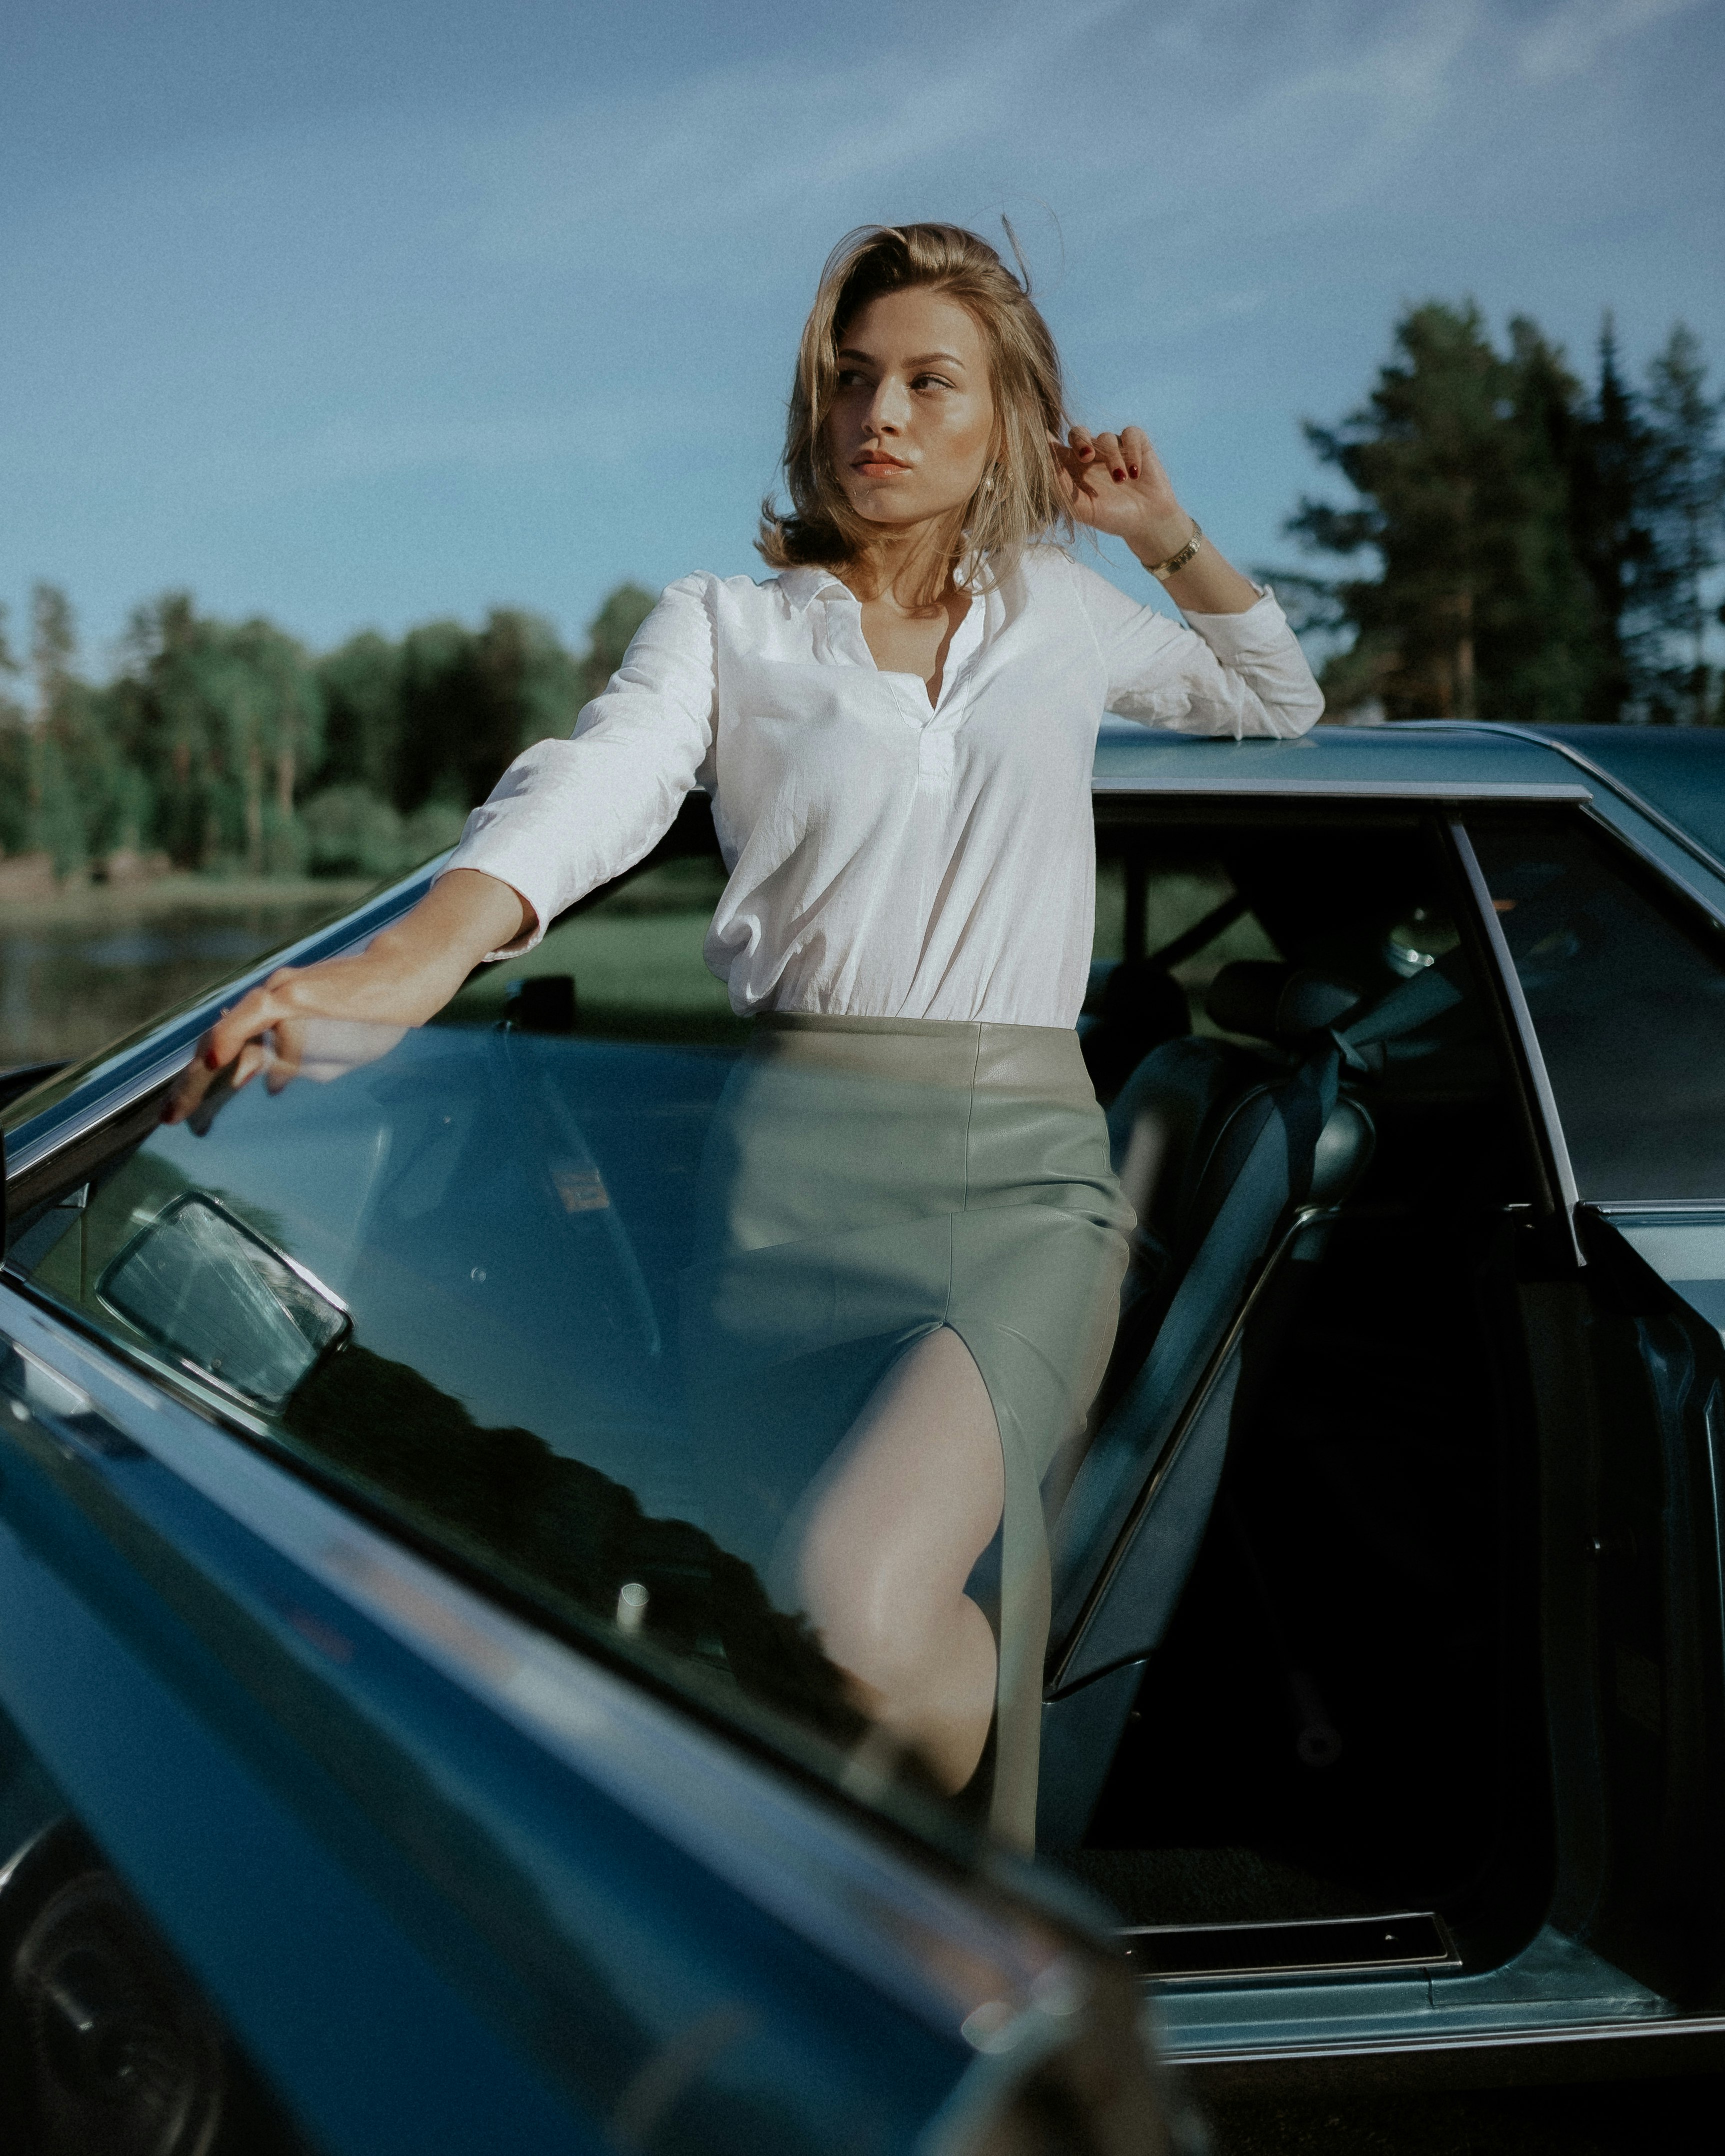 woman in white long sleeve shirt and gray skirt sitting on blue car